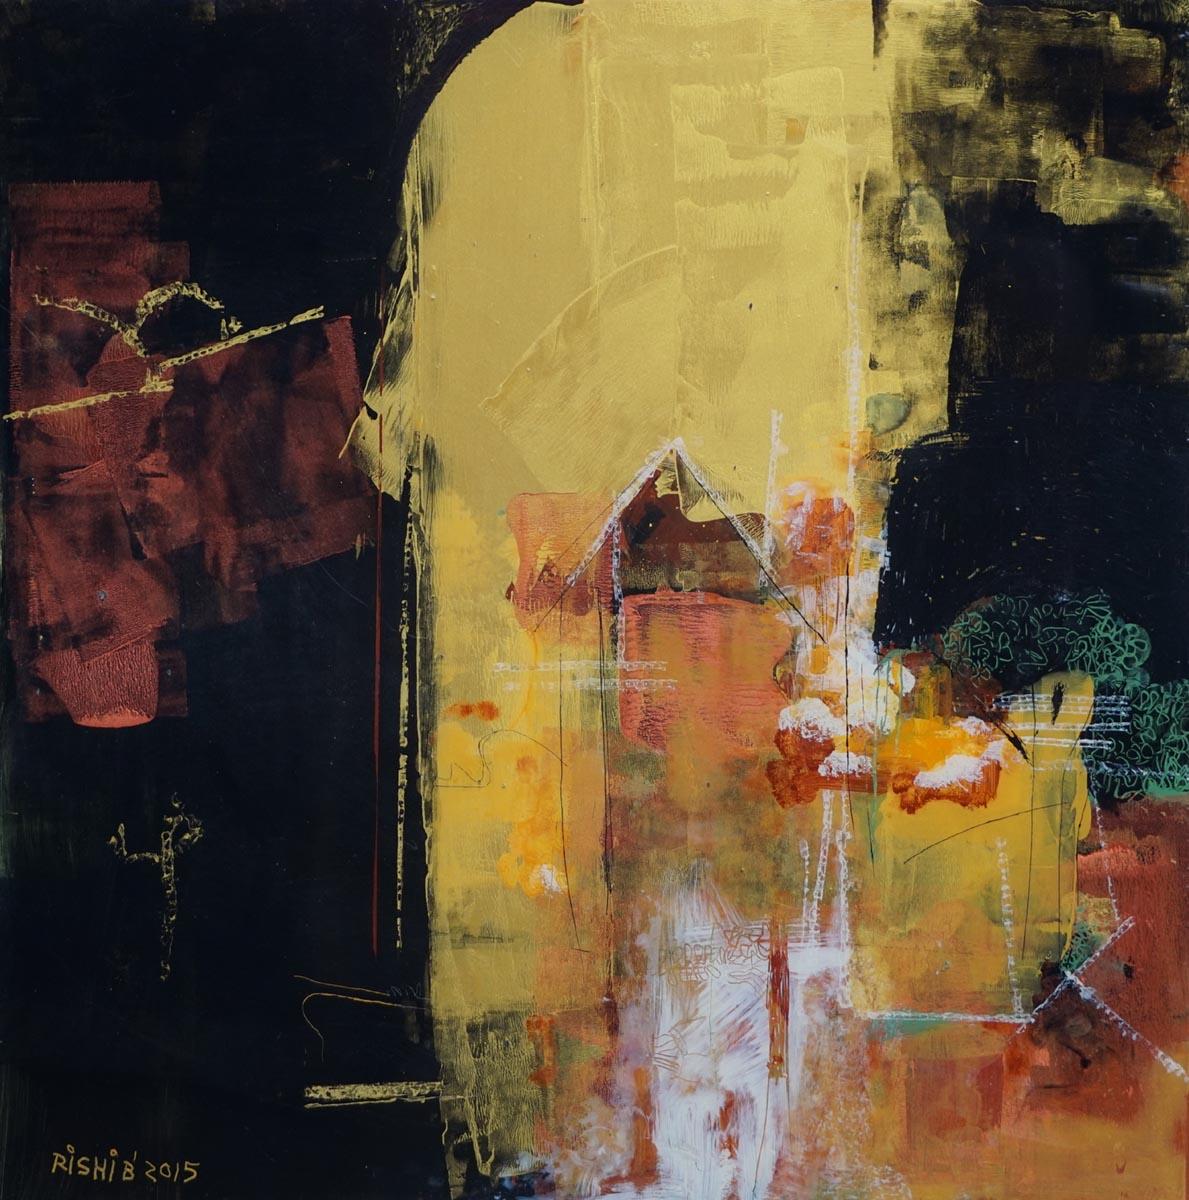 City Twilight, Oil on Acrylic, Black, Red, Yellow by Indian Artist "In Stock" - Mixed Media Art by S. G. Vasudev